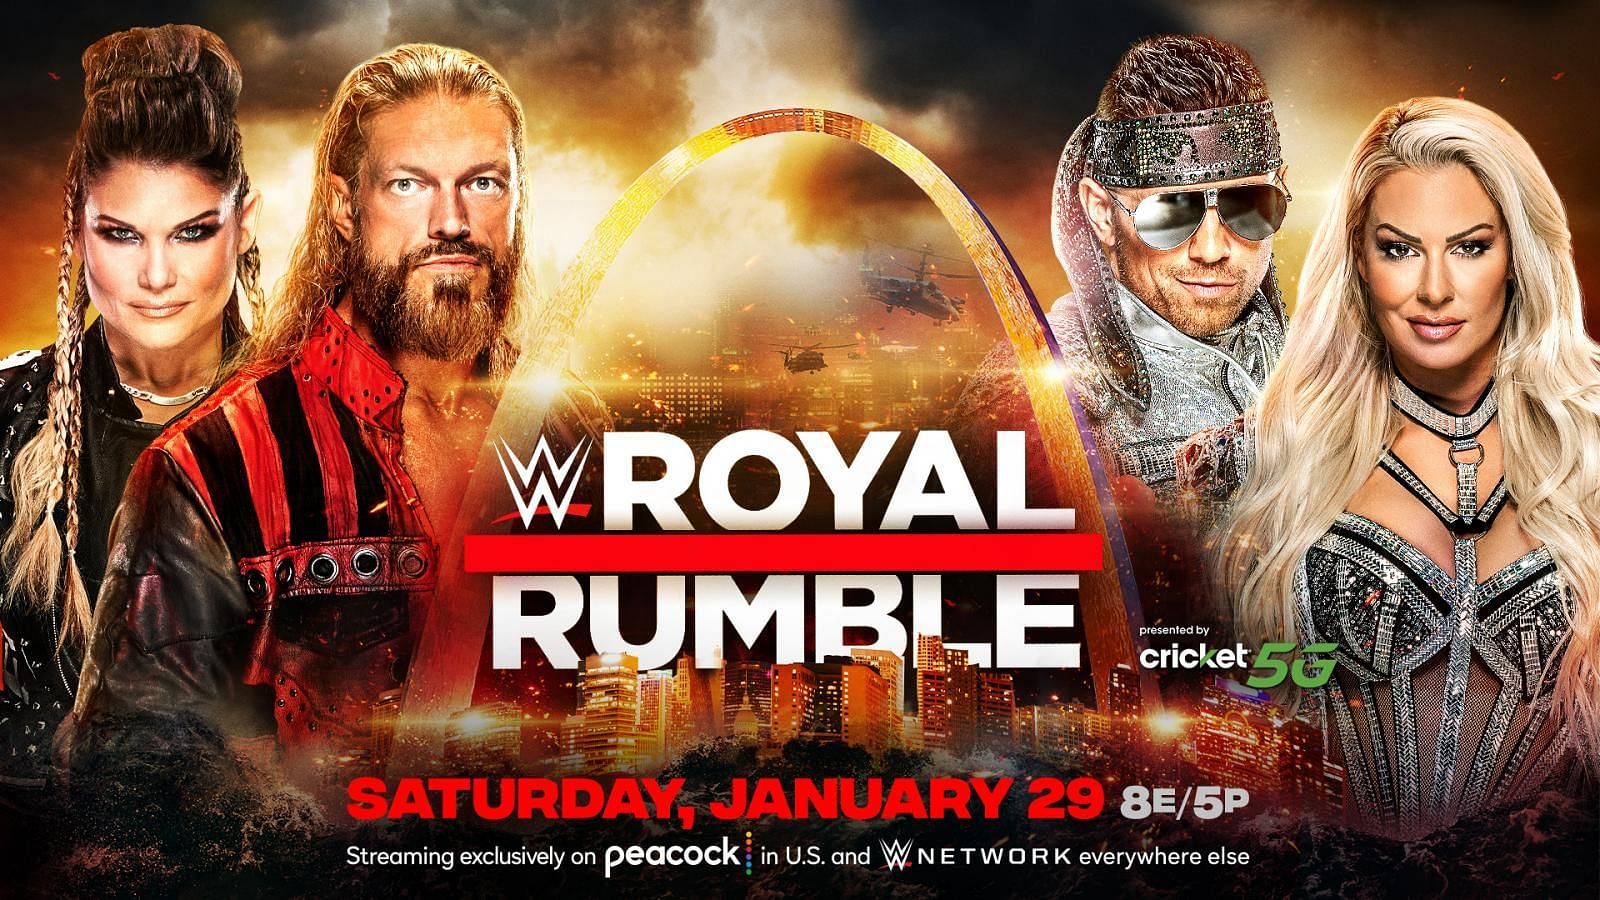 WWE Hall of Famer couple Edge &amp; Beth Phoenix will square off against The Miz &amp; Maryse at the Royal Rumble